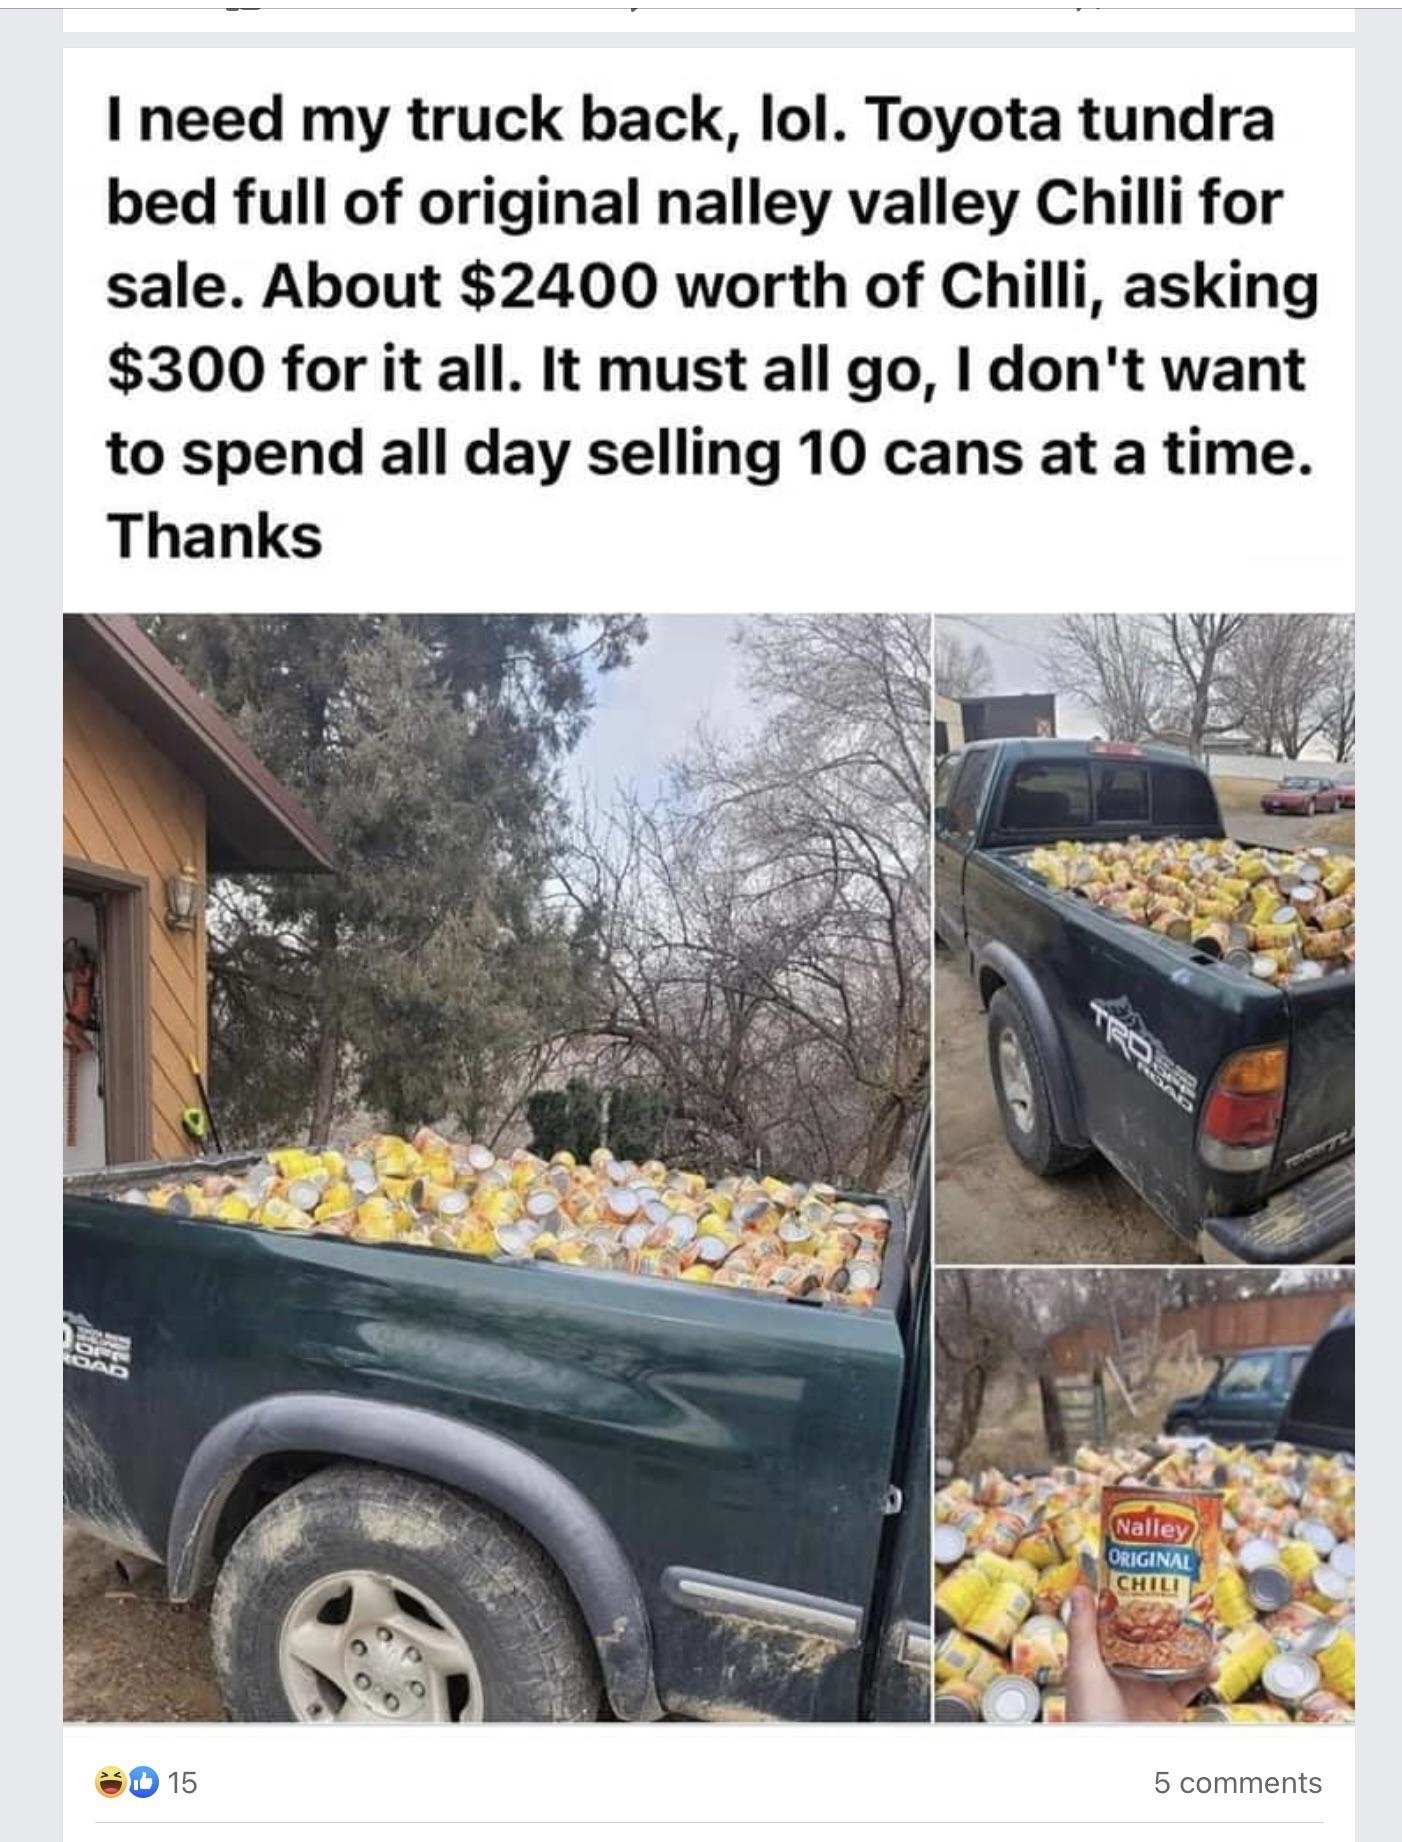 Image shows a pickup truck bed filled with numerous cans of Nalley Valley Chili for sale; text indicates a bulk sale offer of $300 for $2,400 worth of chili to empty the truck